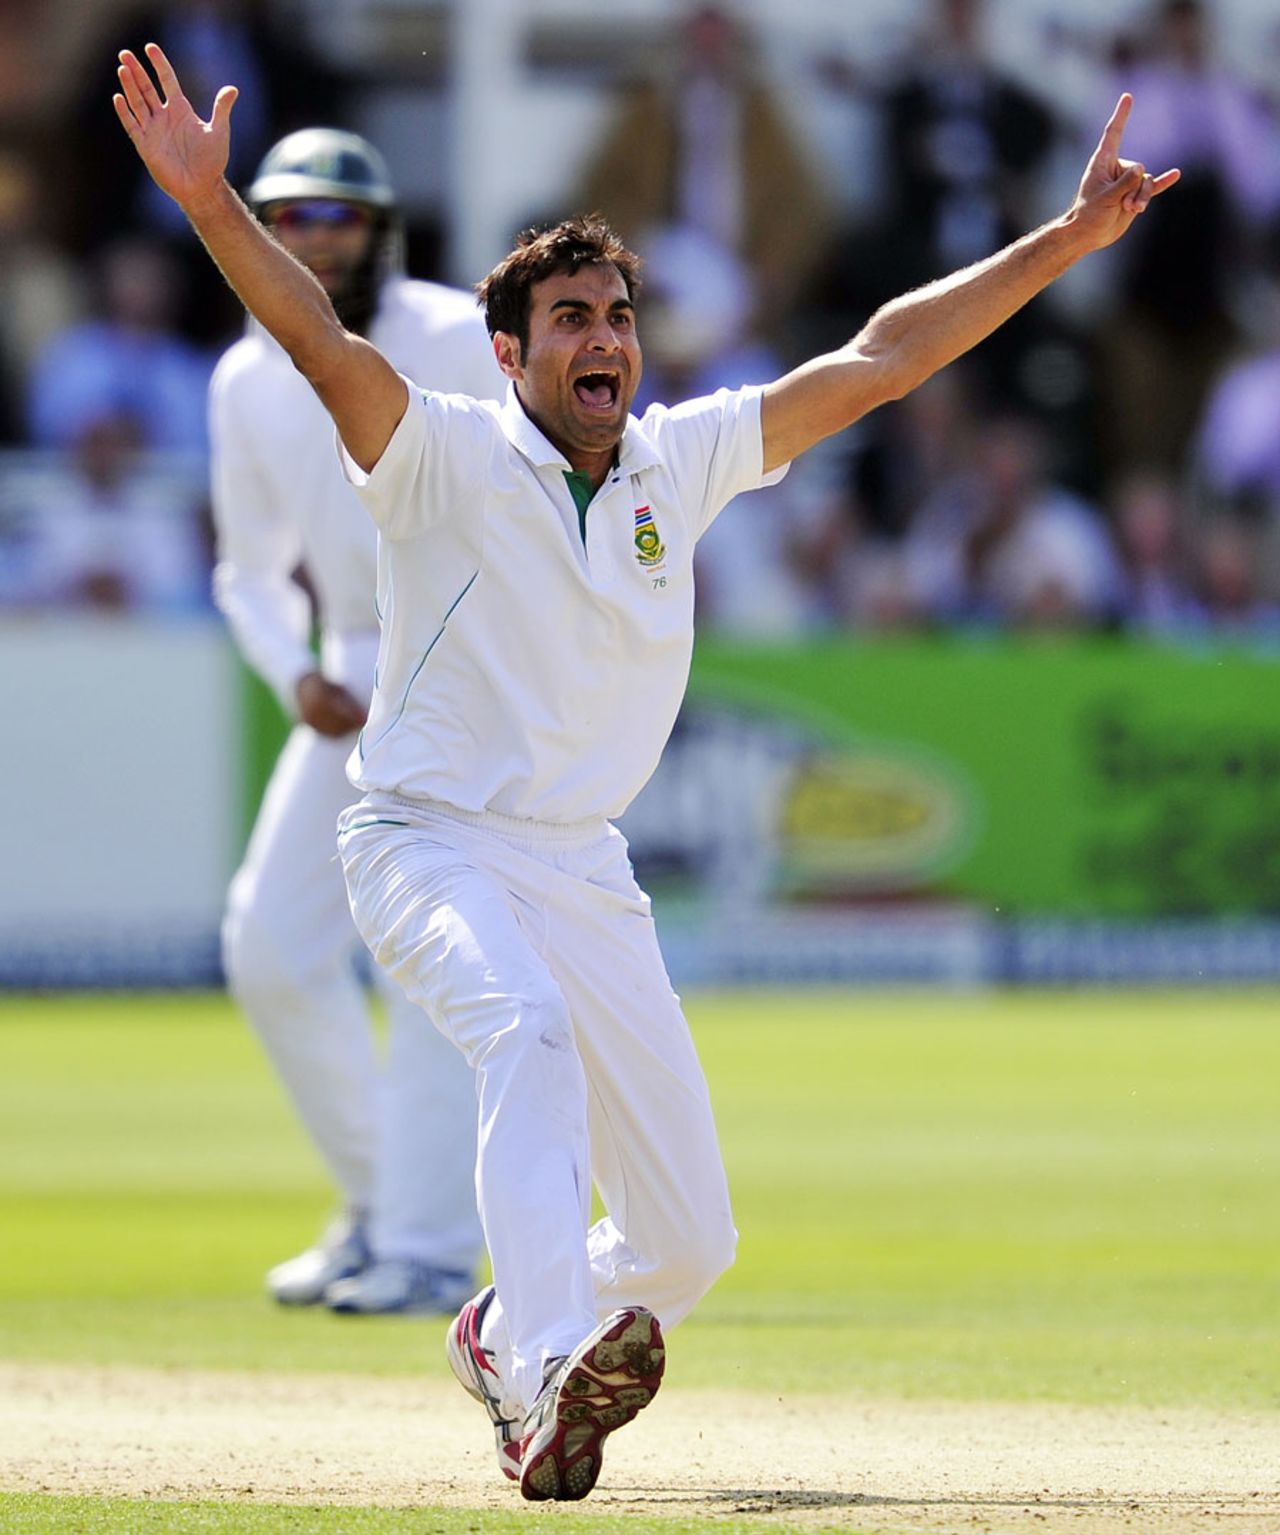 Imran Tahir bowled four probing overs before tea, England v South Africa, 3rd Investec Test, Lord's, 2nd day, August 17, 2012